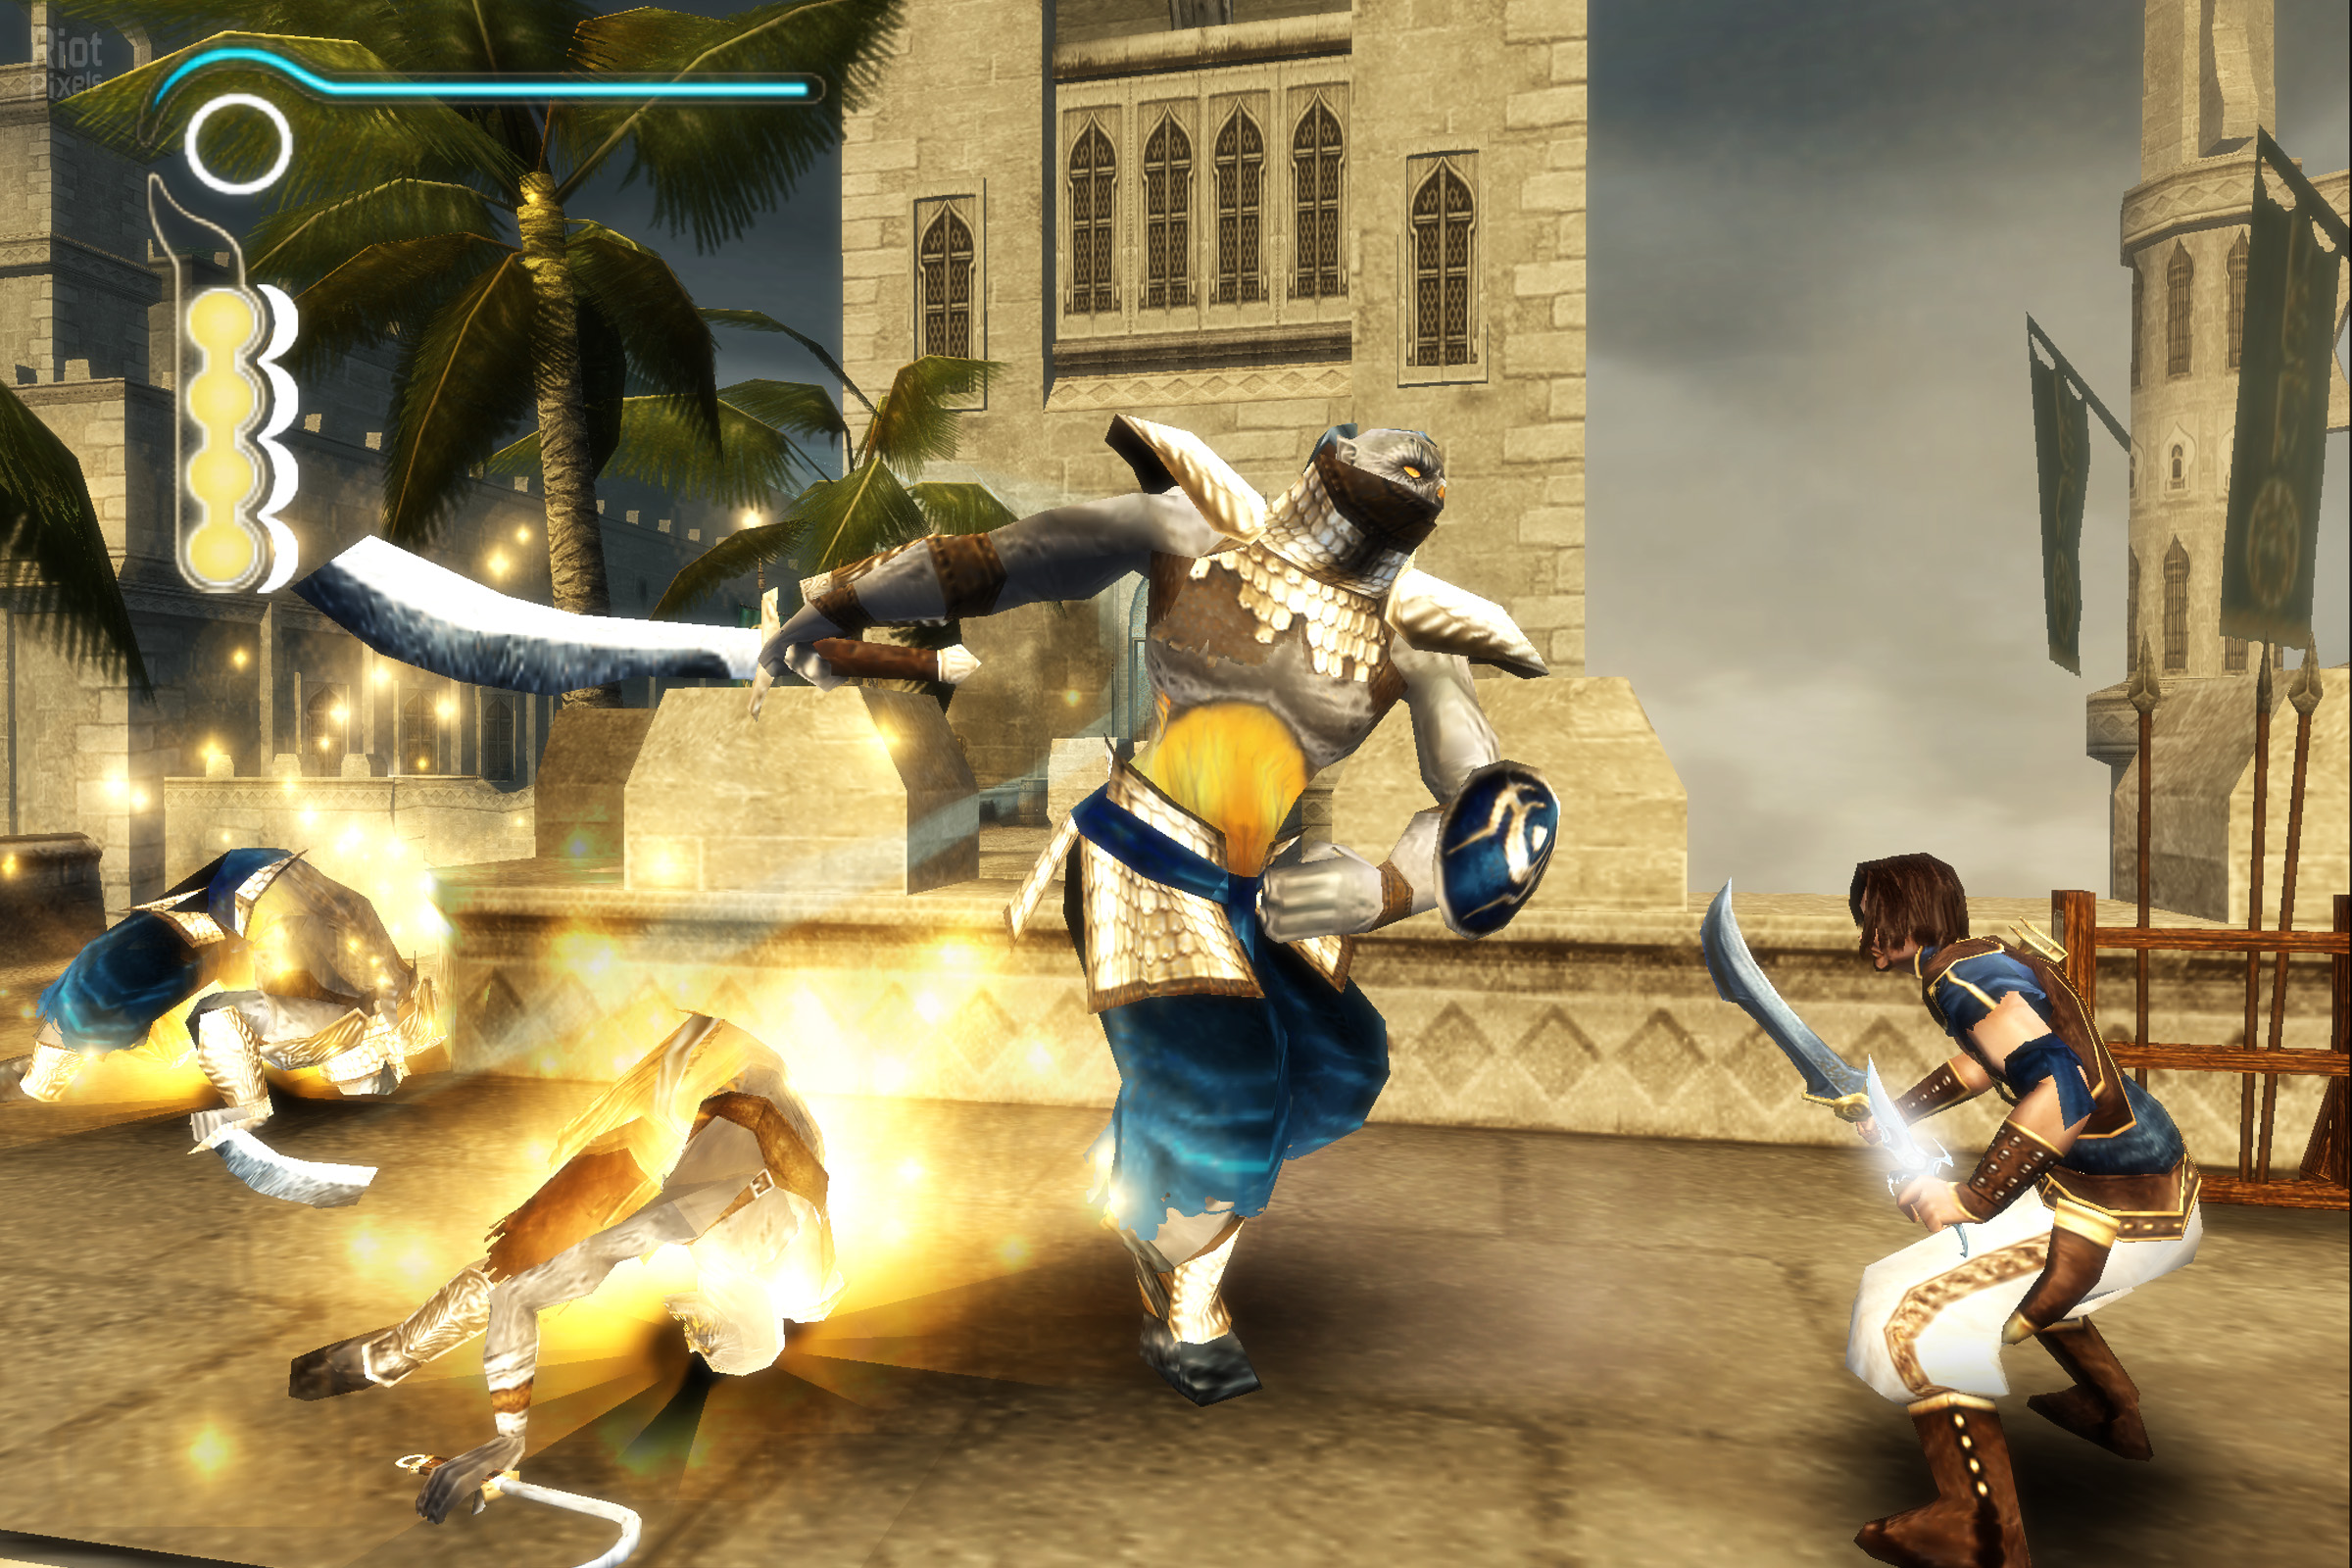 Prince of persia 2008 xbox iso extract